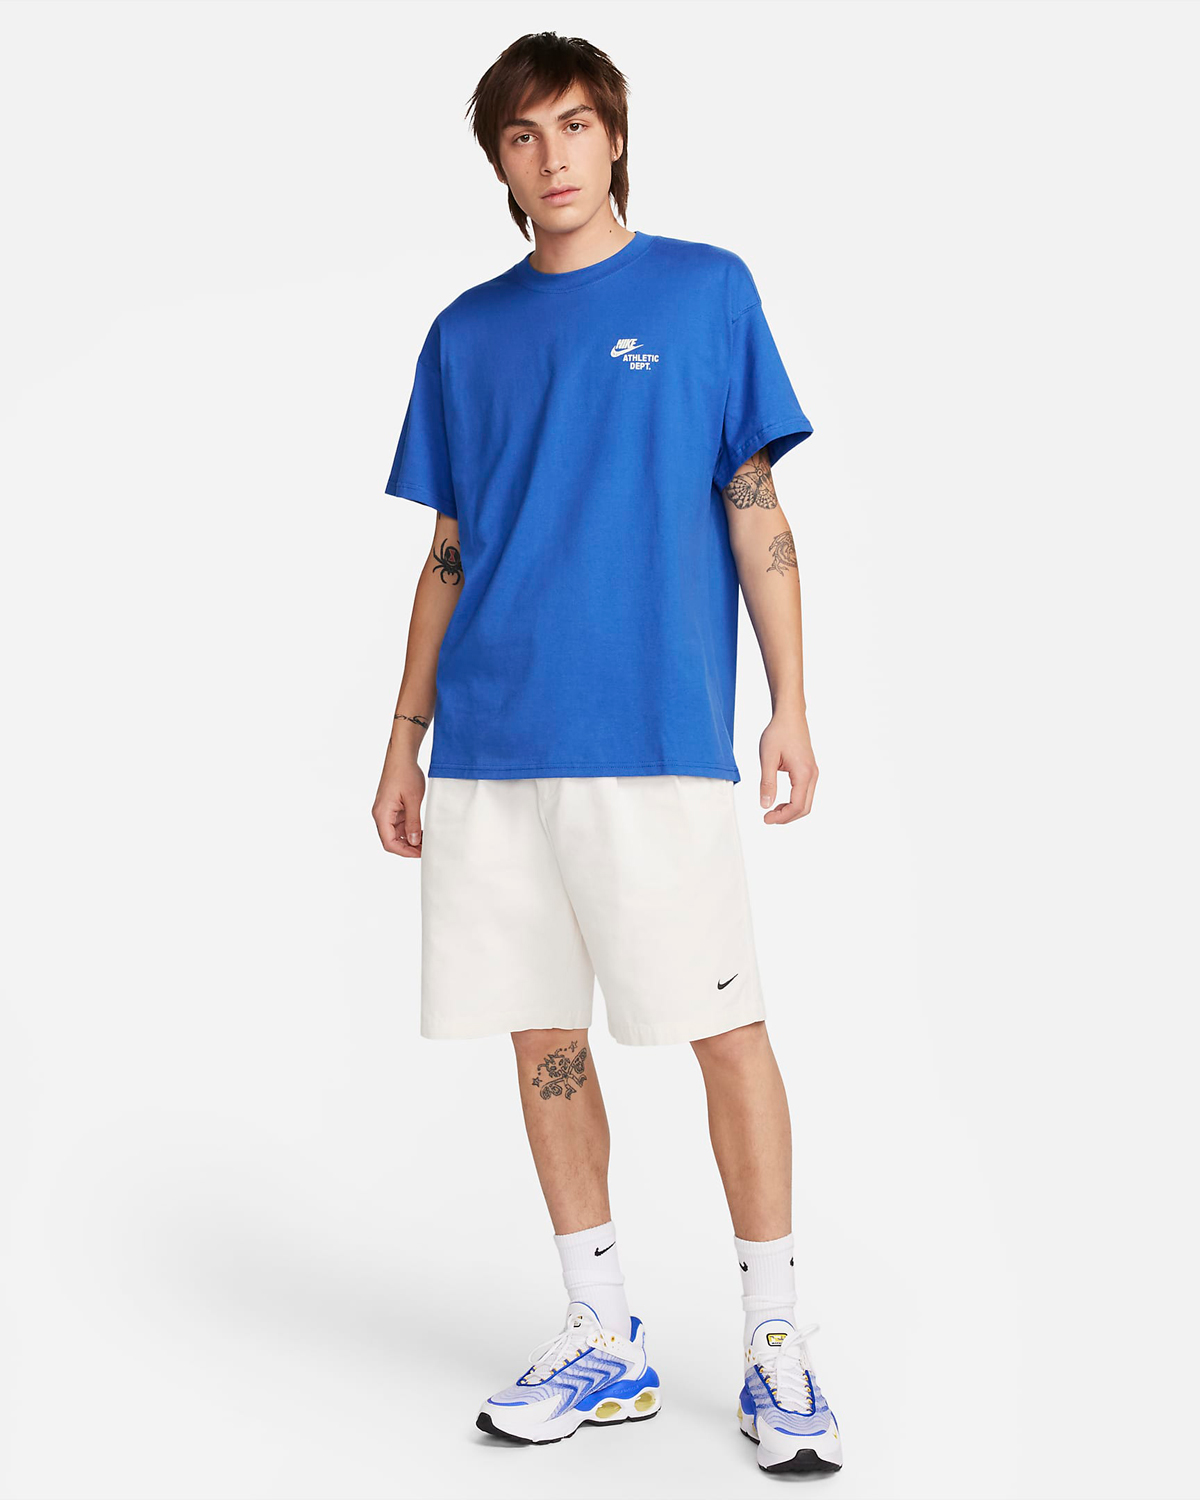 Nike-Sportswear-Max90-T-Shirt-Game-Royal-Outfit